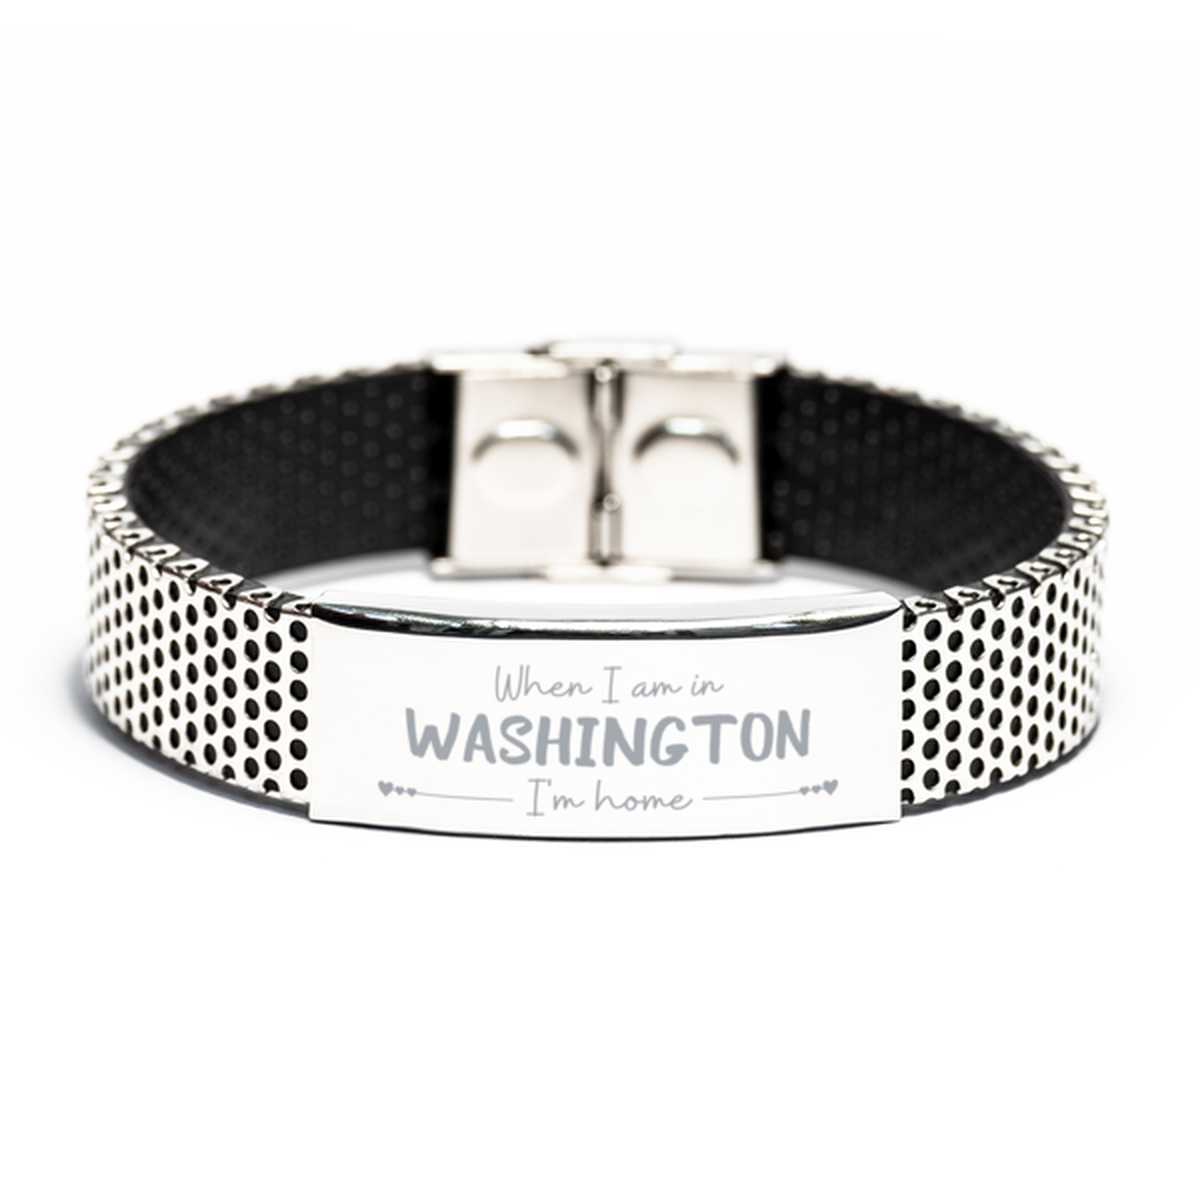 When I am in Washington I'm home Stainless Steel Bracelet, Cheap Gifts For Washington, State Washington Birthday Gifts for Friends Coworker